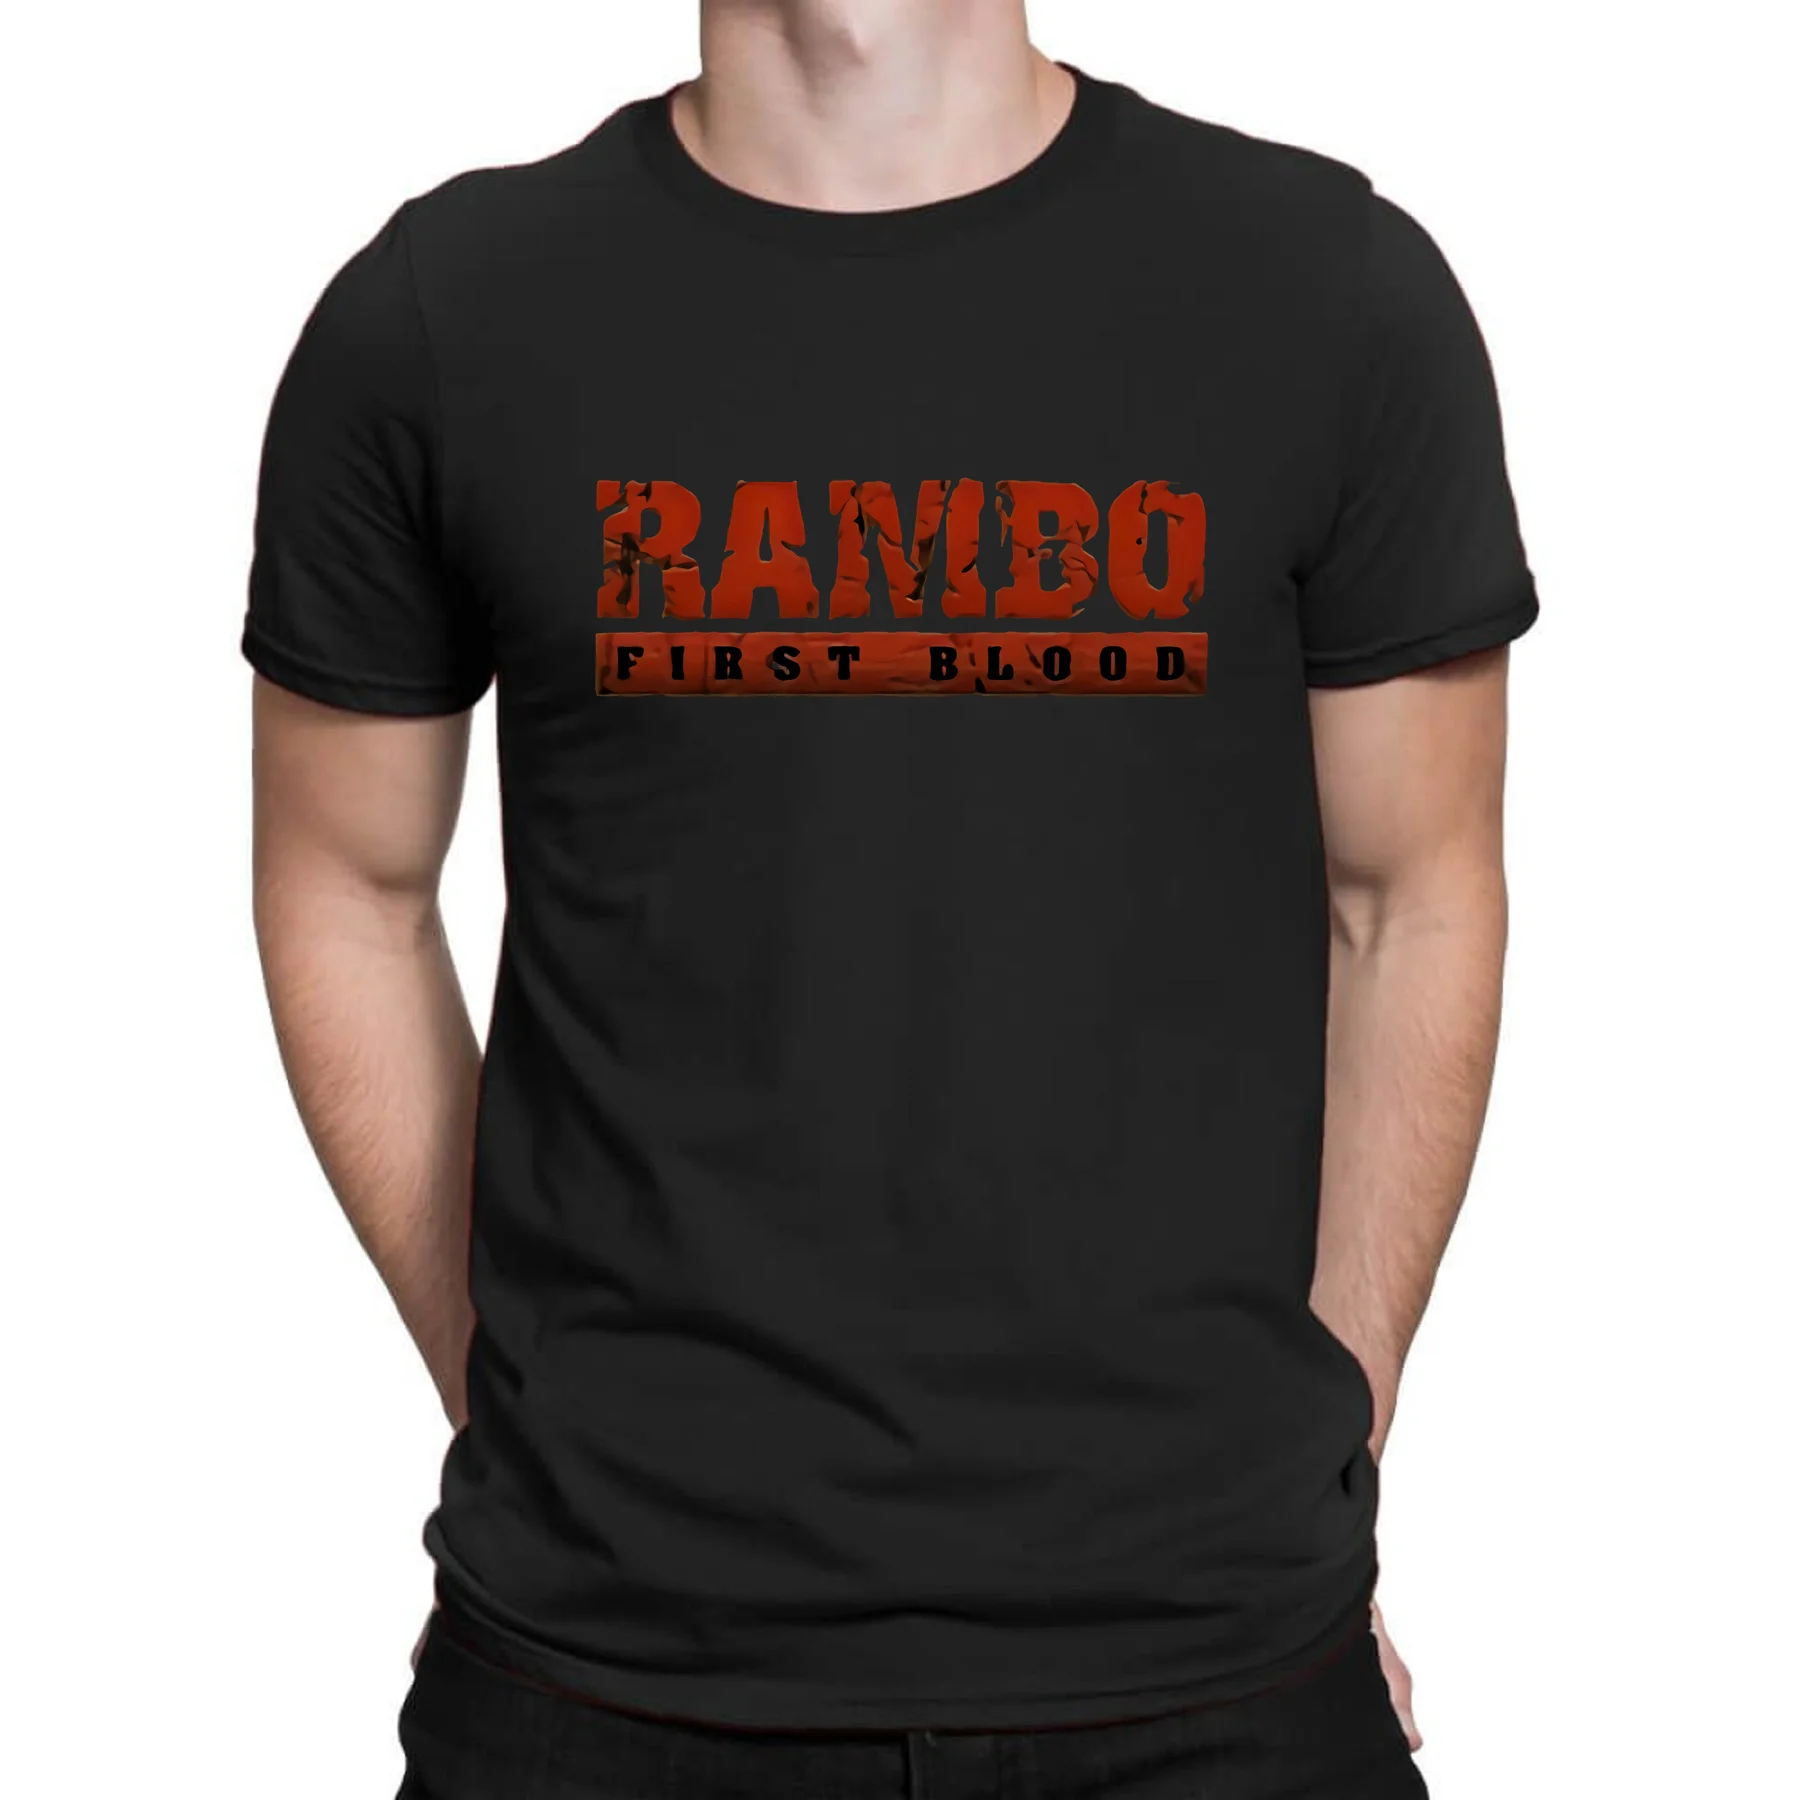 

Amazing Tees Male T Shirt Casual Oversized Essential Rambo First Blaood T-shirt Men T-shirts Graphic Streetwear S-3XL